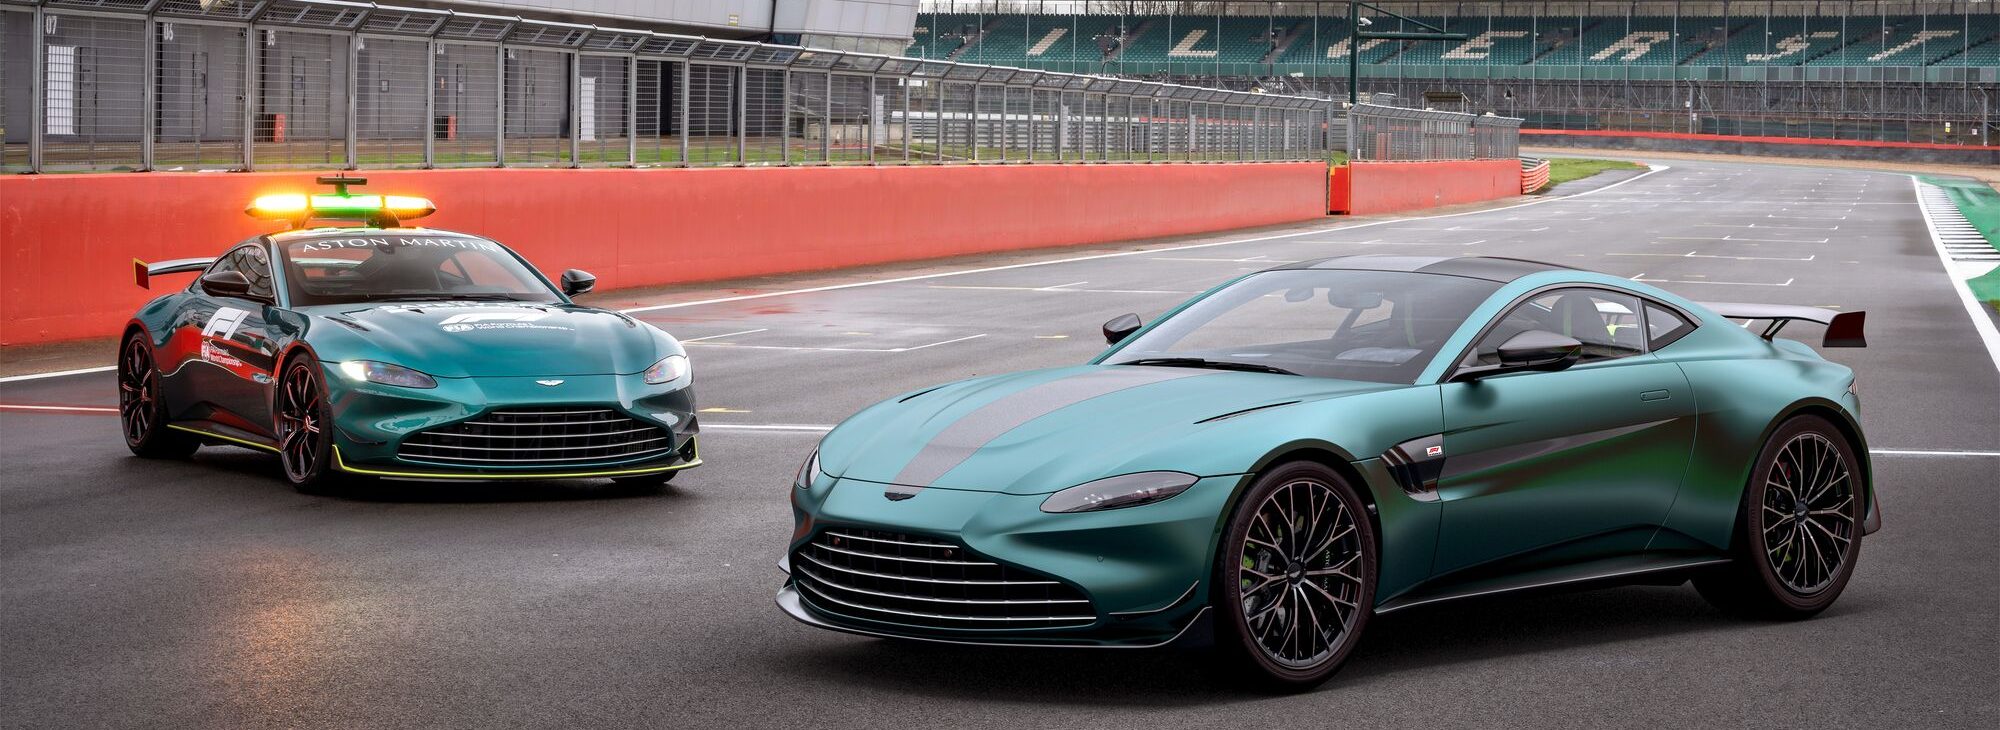 Aston Martin F1 2021  This is the story of Aston Martin Racing 